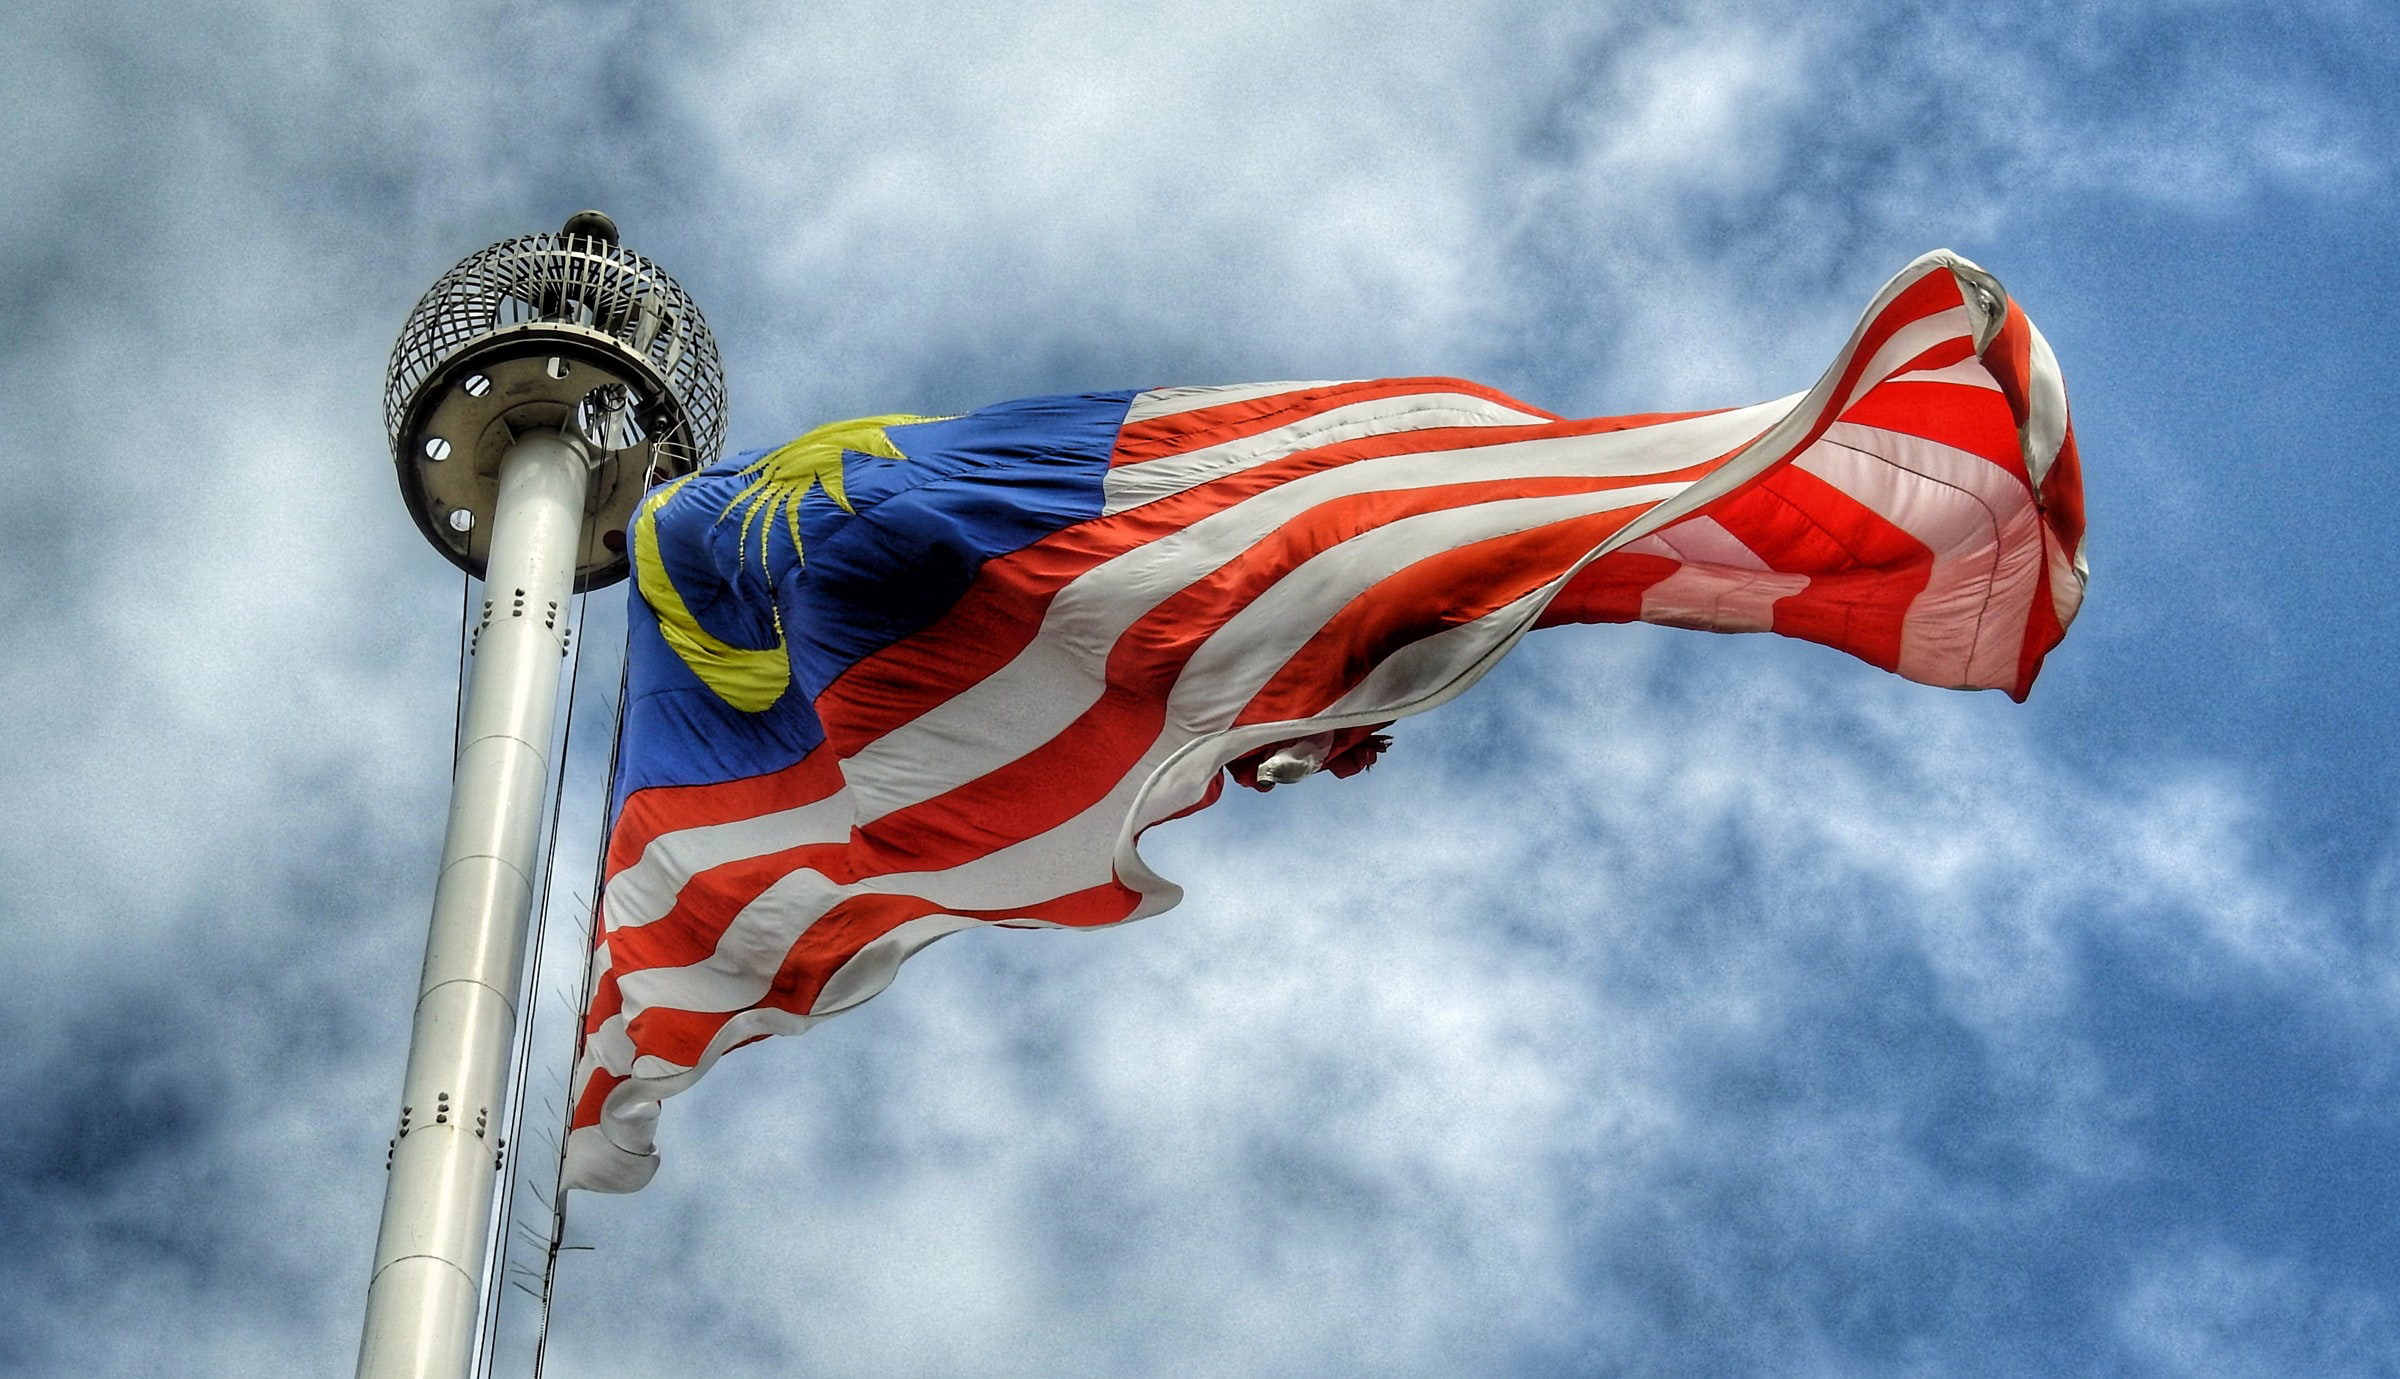 Mobile experience continues to steadily improve in Malaysia